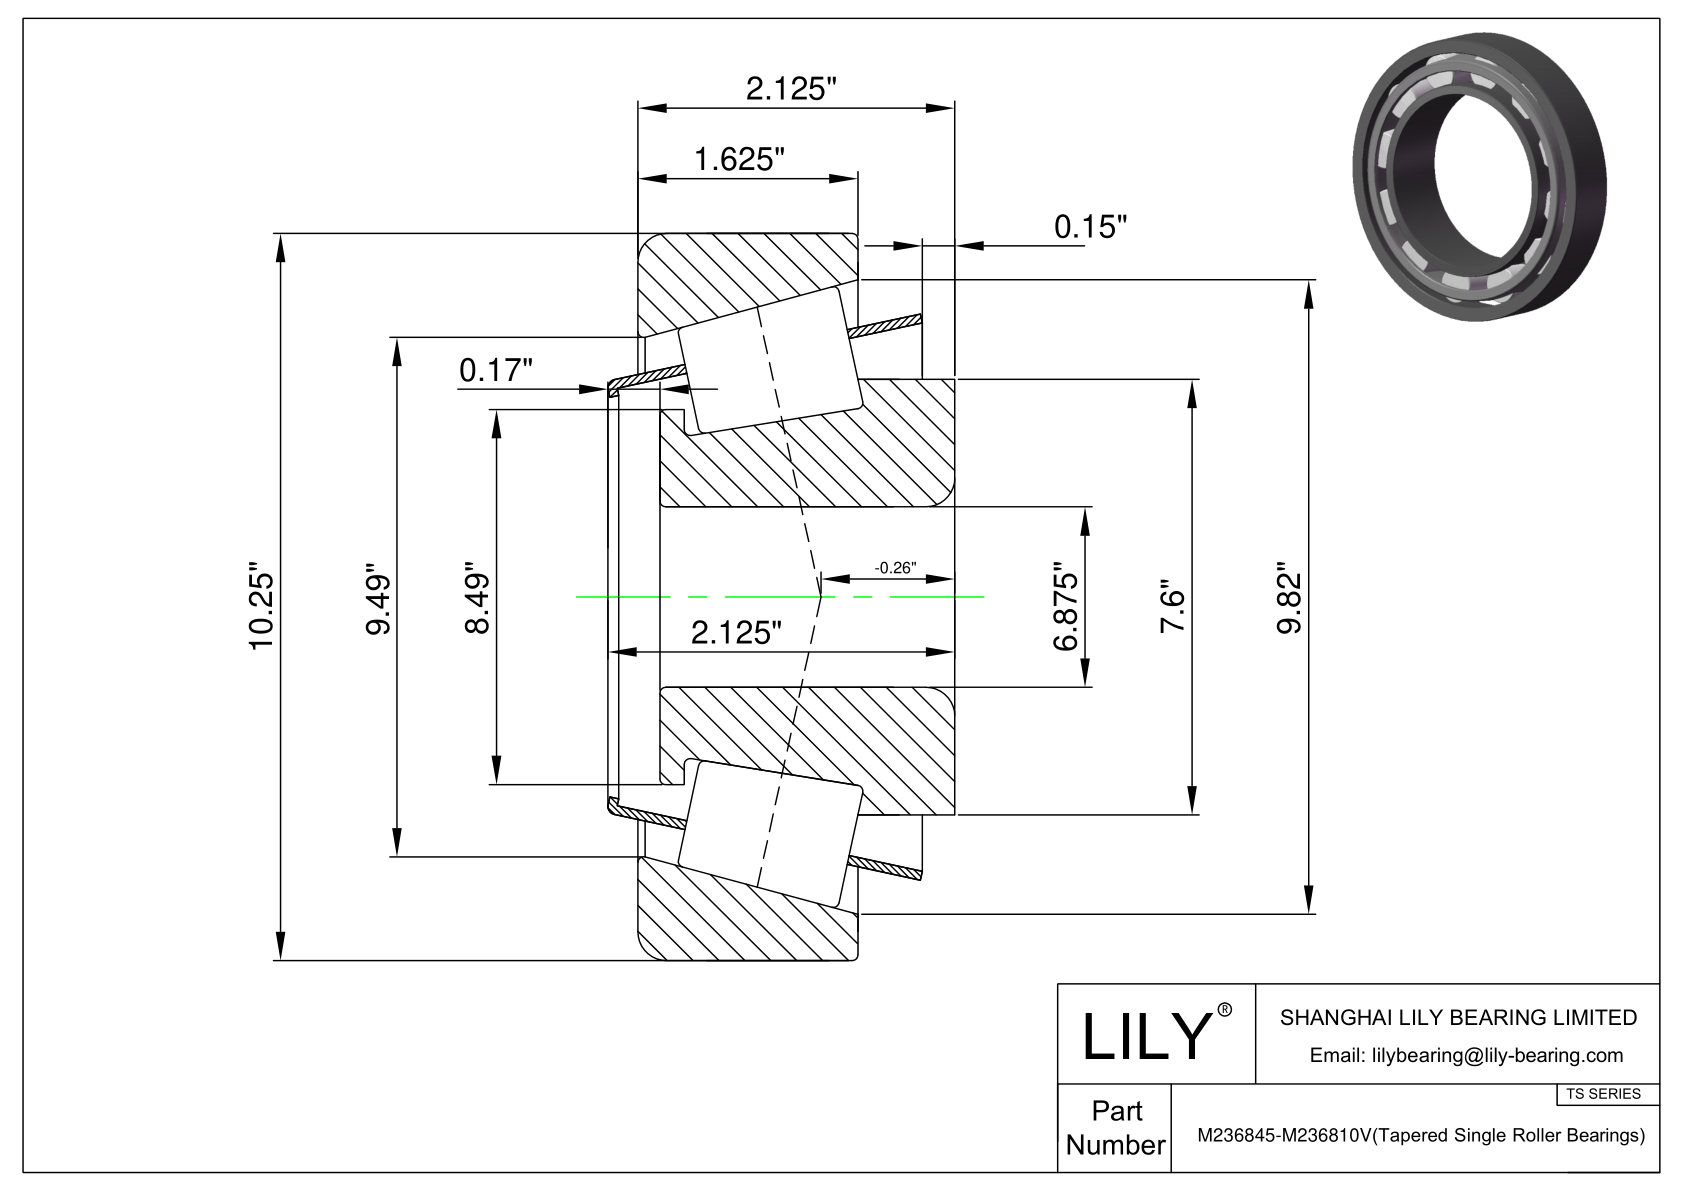 M236845-M236810V TS (Tapered Single Roller Bearings) (Imperial) cad drawing